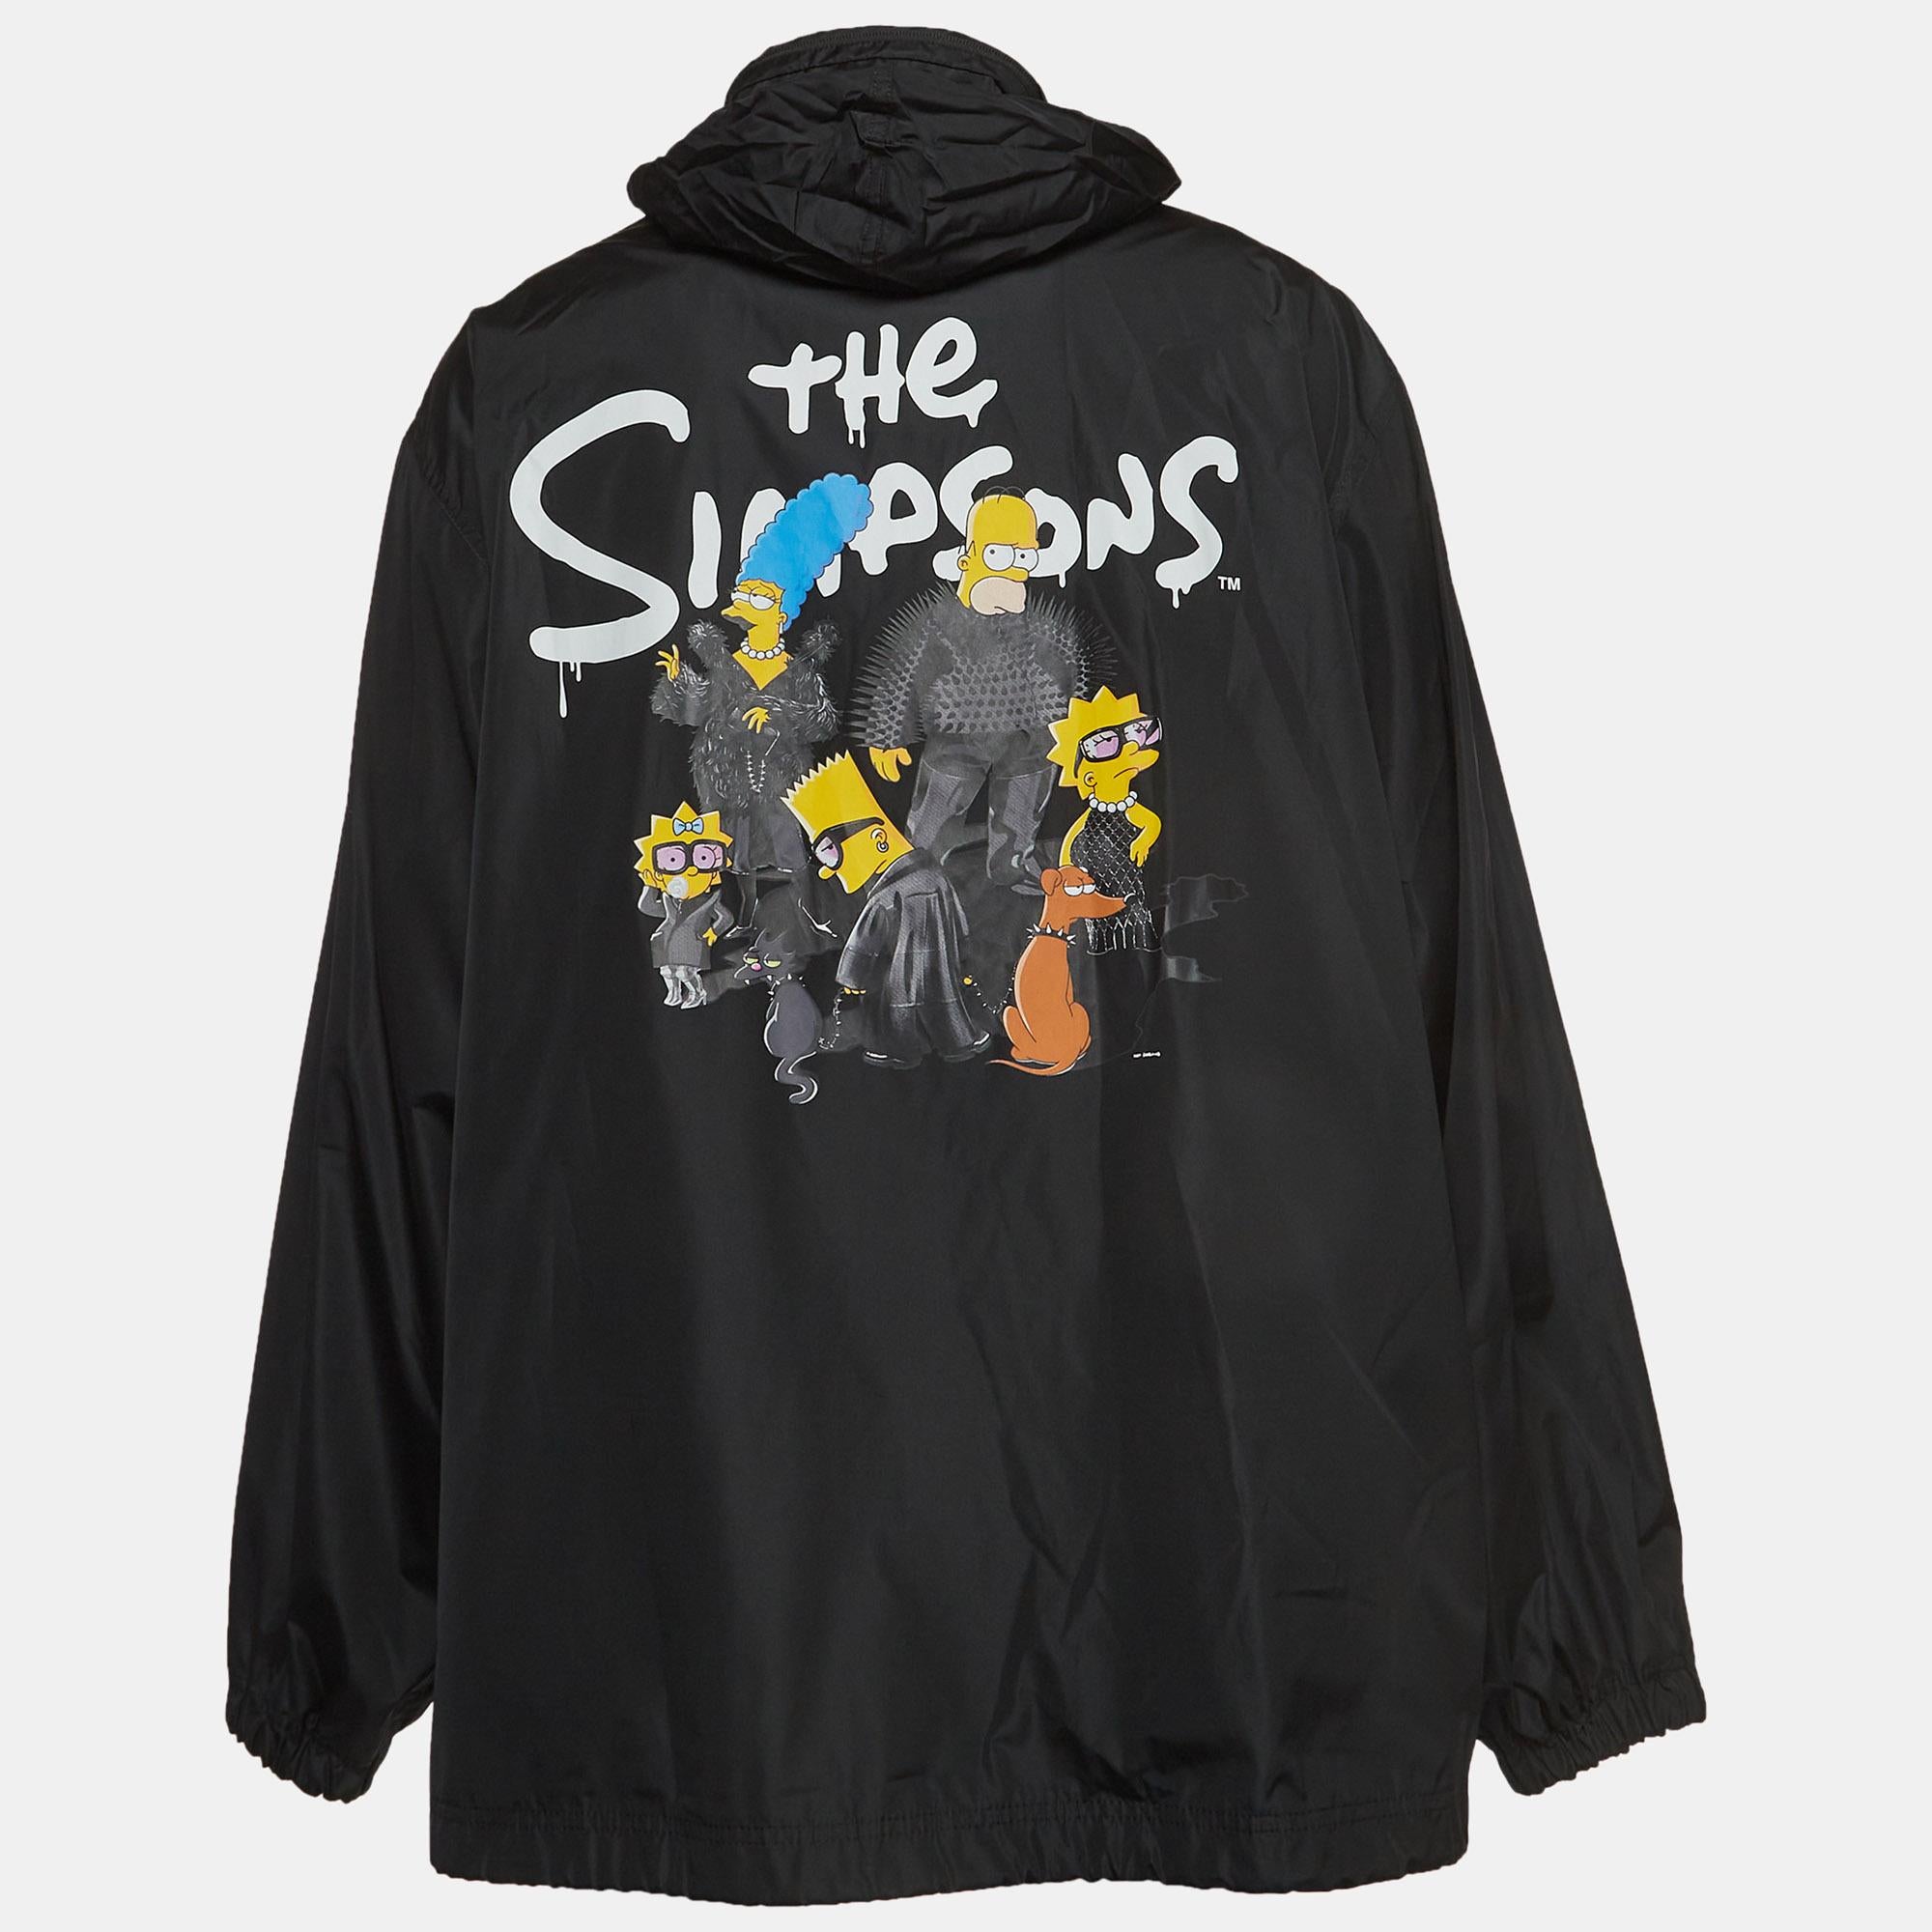 This windbreaker jacket from the Balenciaga X The Simpsons collab will be a great addition to your closet. Tailored using durable fabric, it has long sleeves, front zip fastening, graphic prints, and two pockets.

